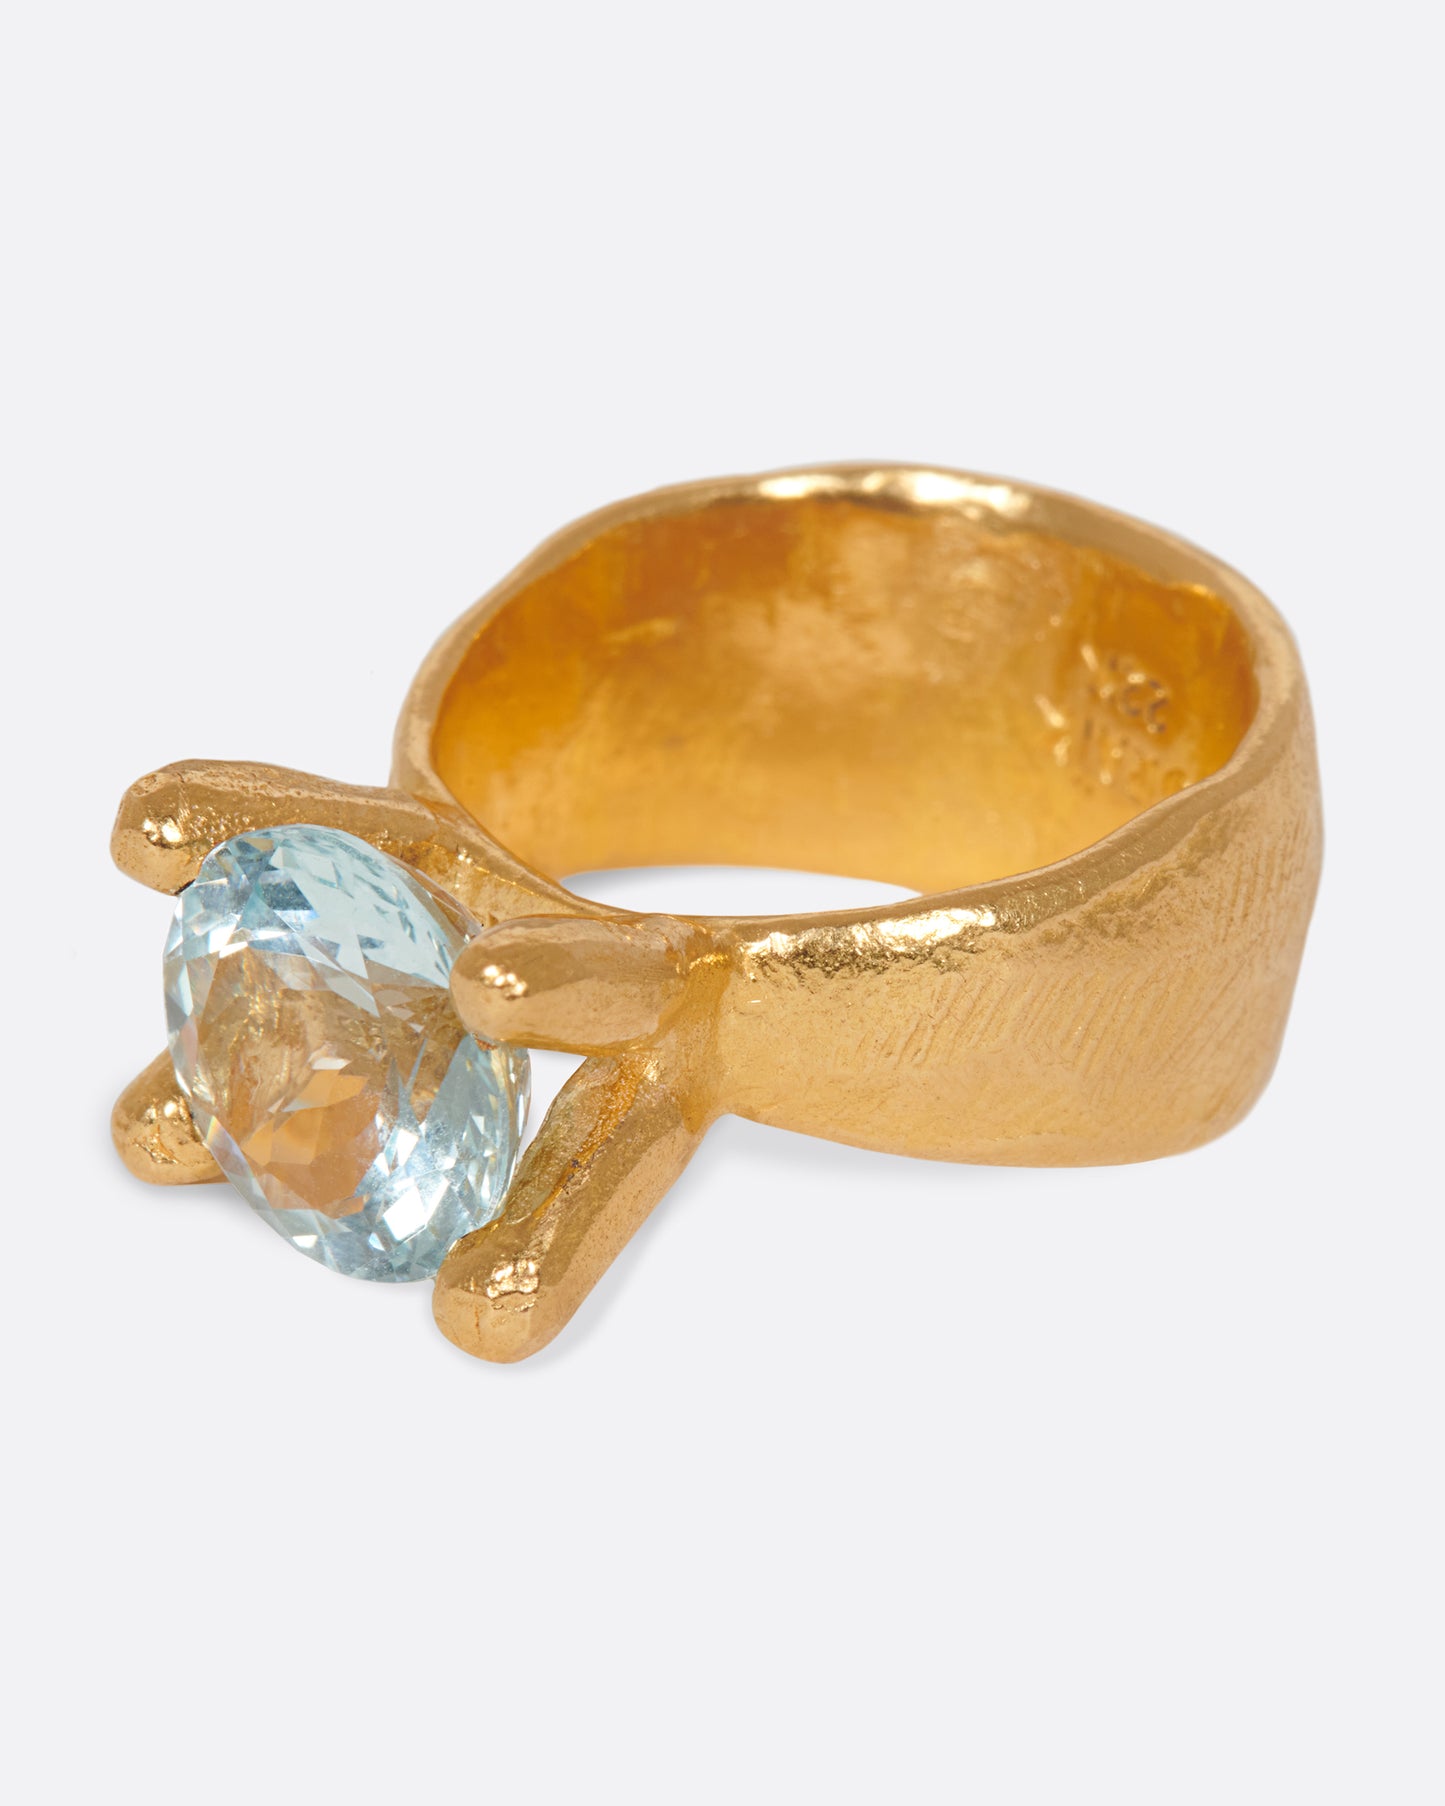 Hand-formed, high karat gold prongs contain a glorious aquamarine atop this ring.